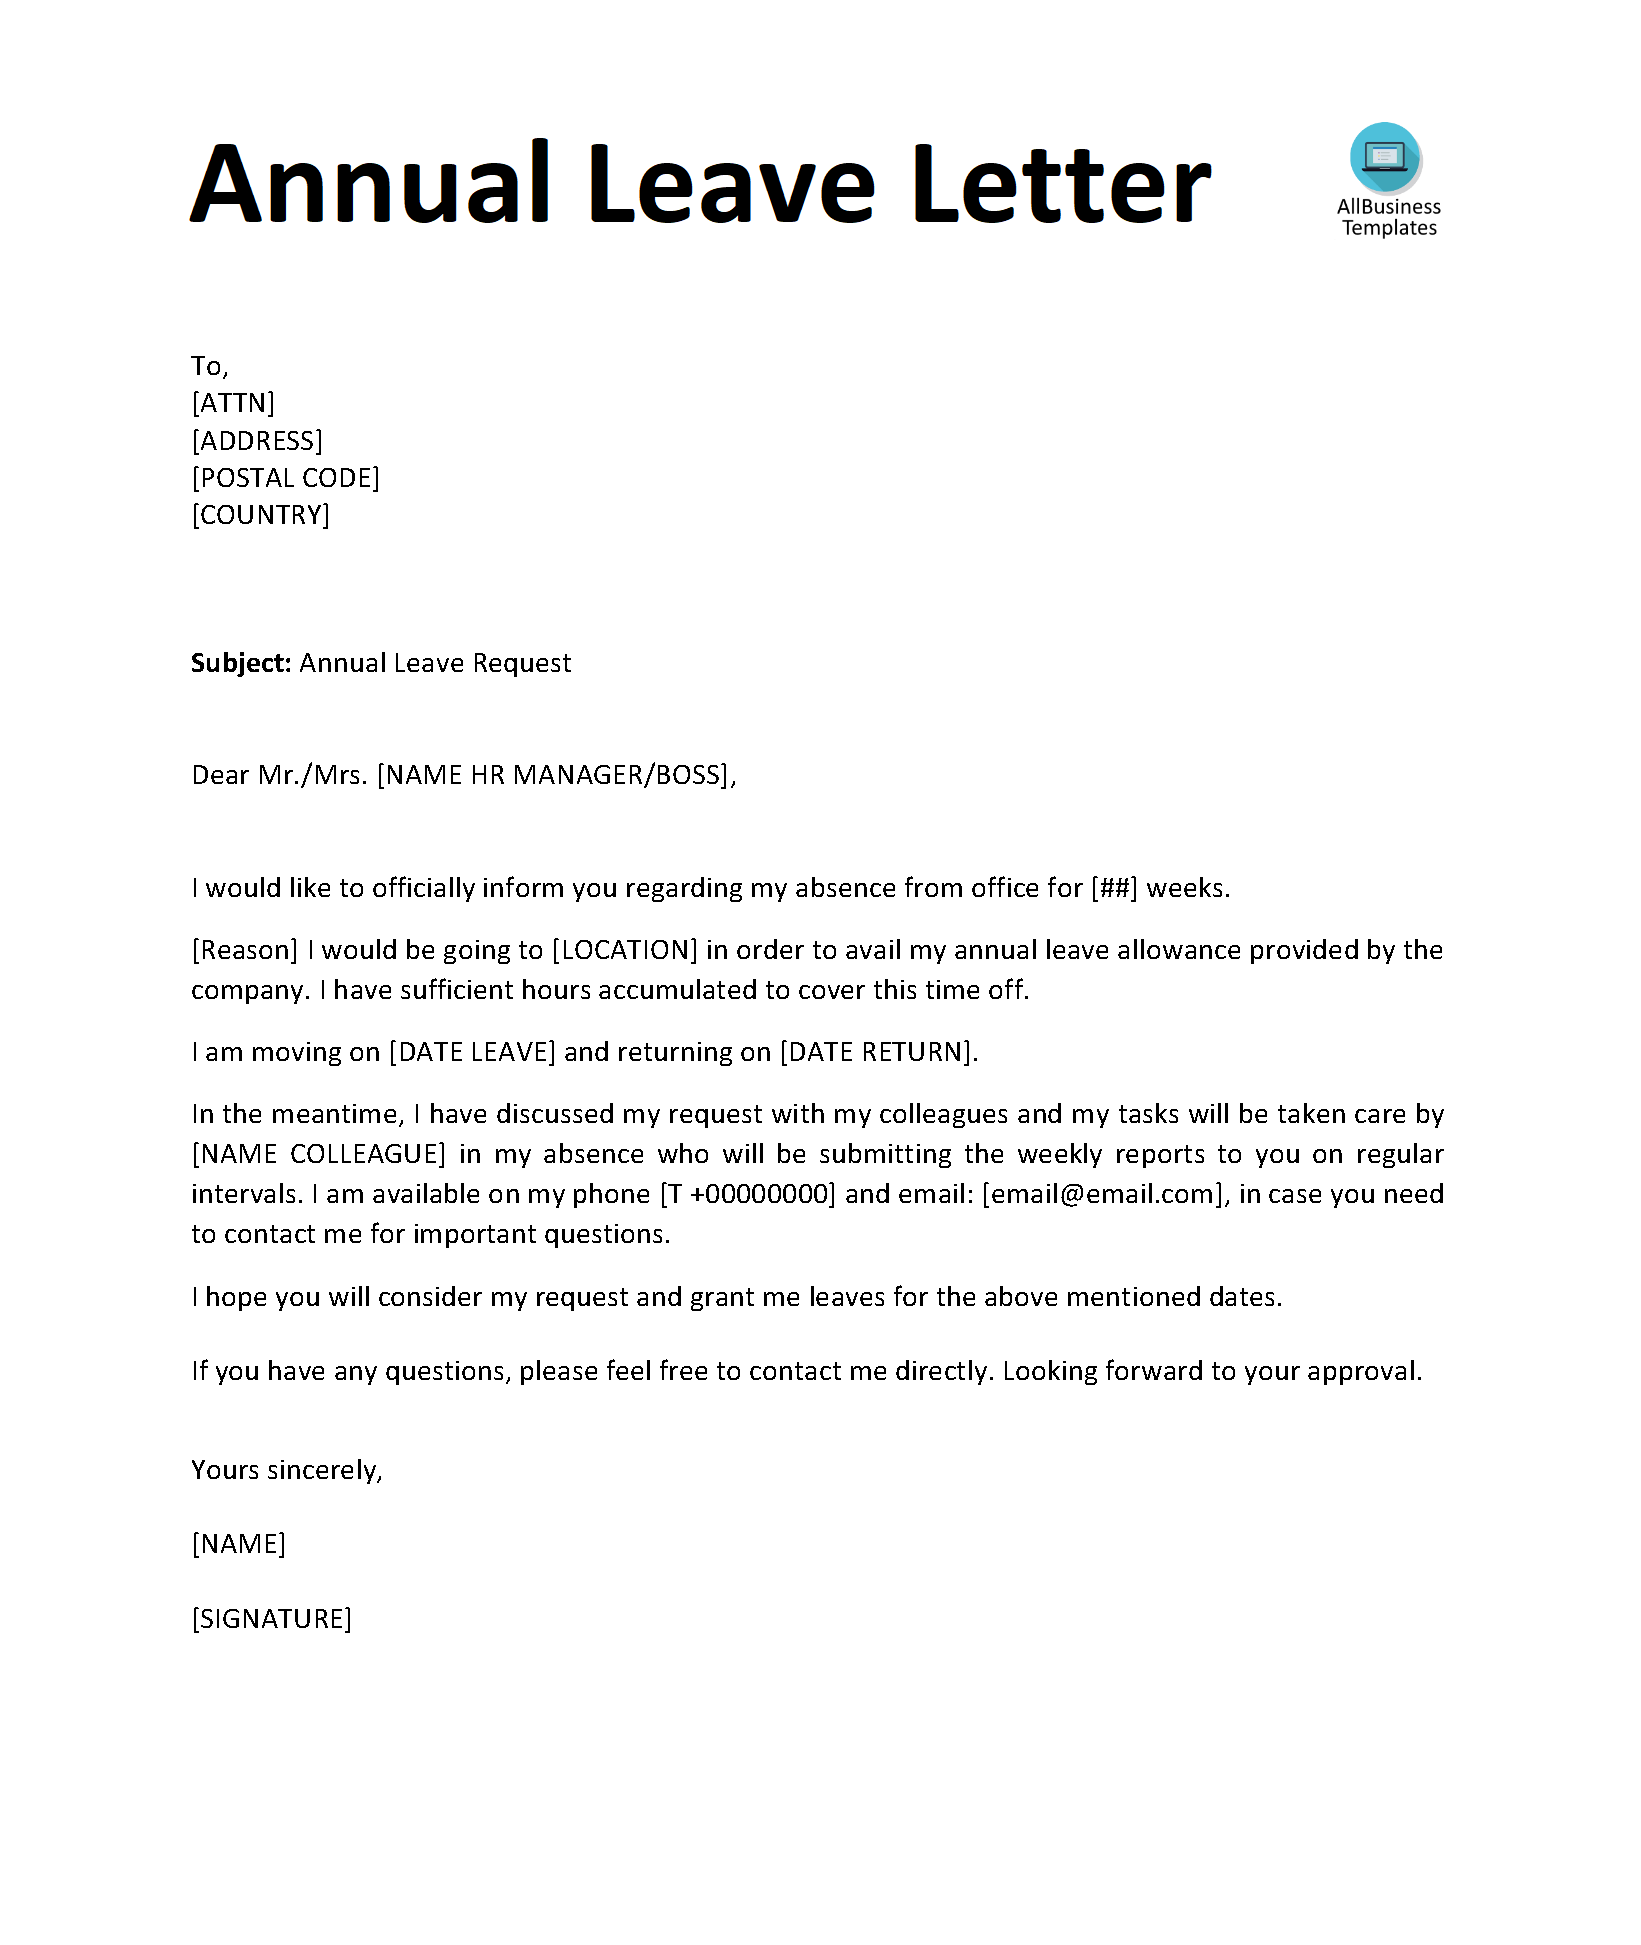 Annual Leave Application sample